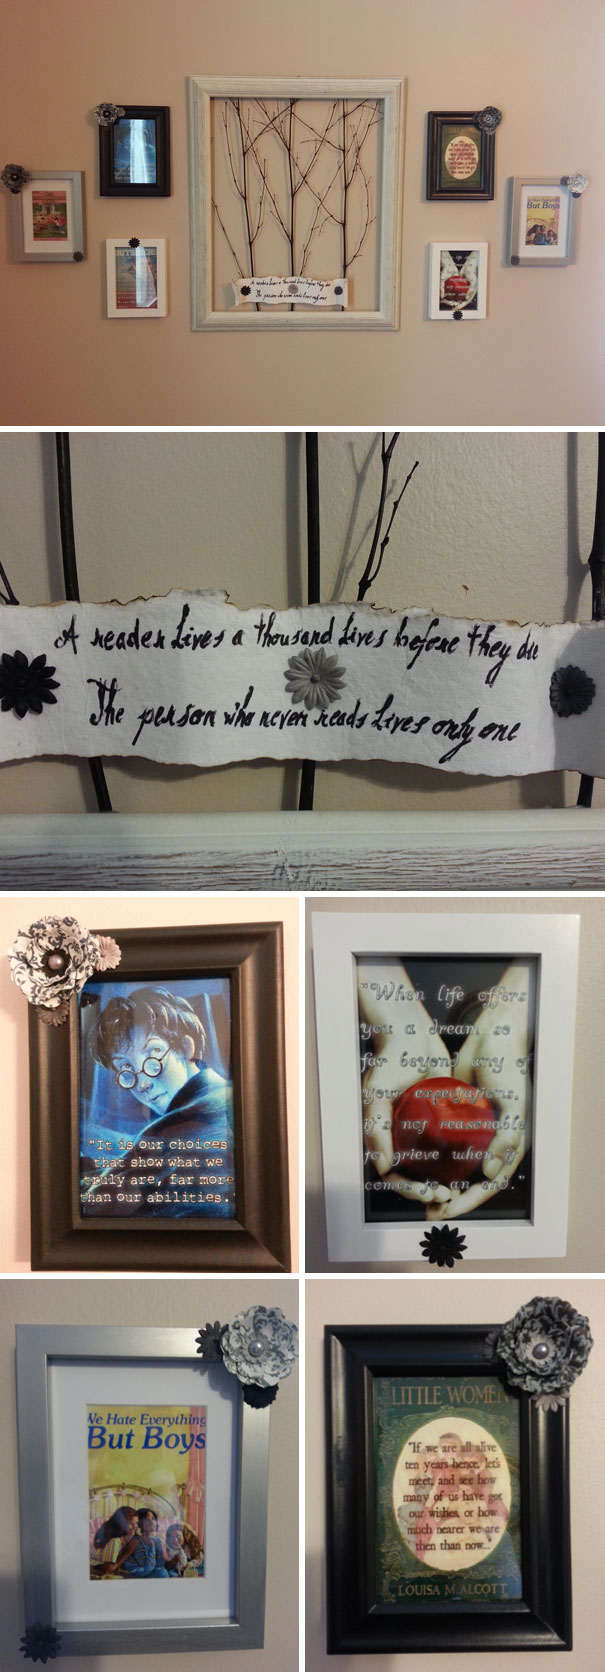 I Made This For My Wife, All Of Her Favorite Childhood And Young Adult Books With Memorable Quotes Plus A Nice George Rr Martin Quote To Tie It All Together. Think She'll Like It?